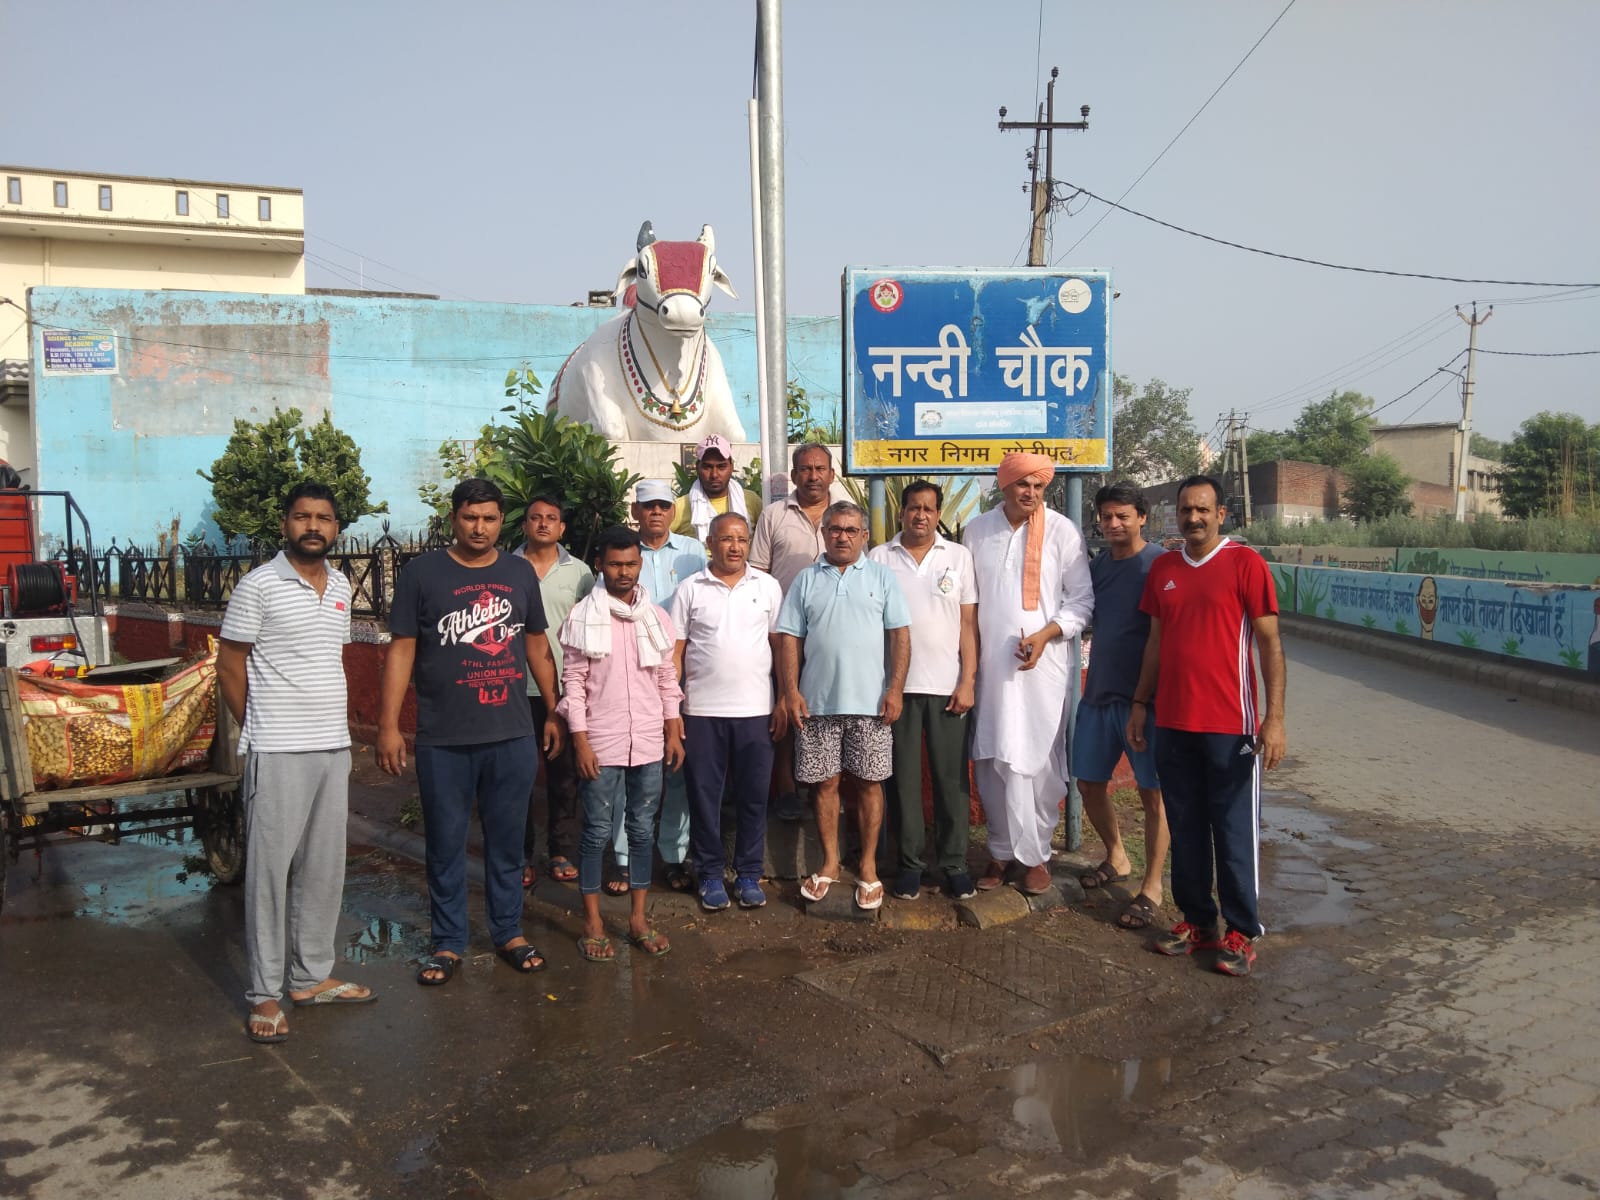 Today's positive news: Cleanliness campaign run by Sonepat Nagar Improvement Manch